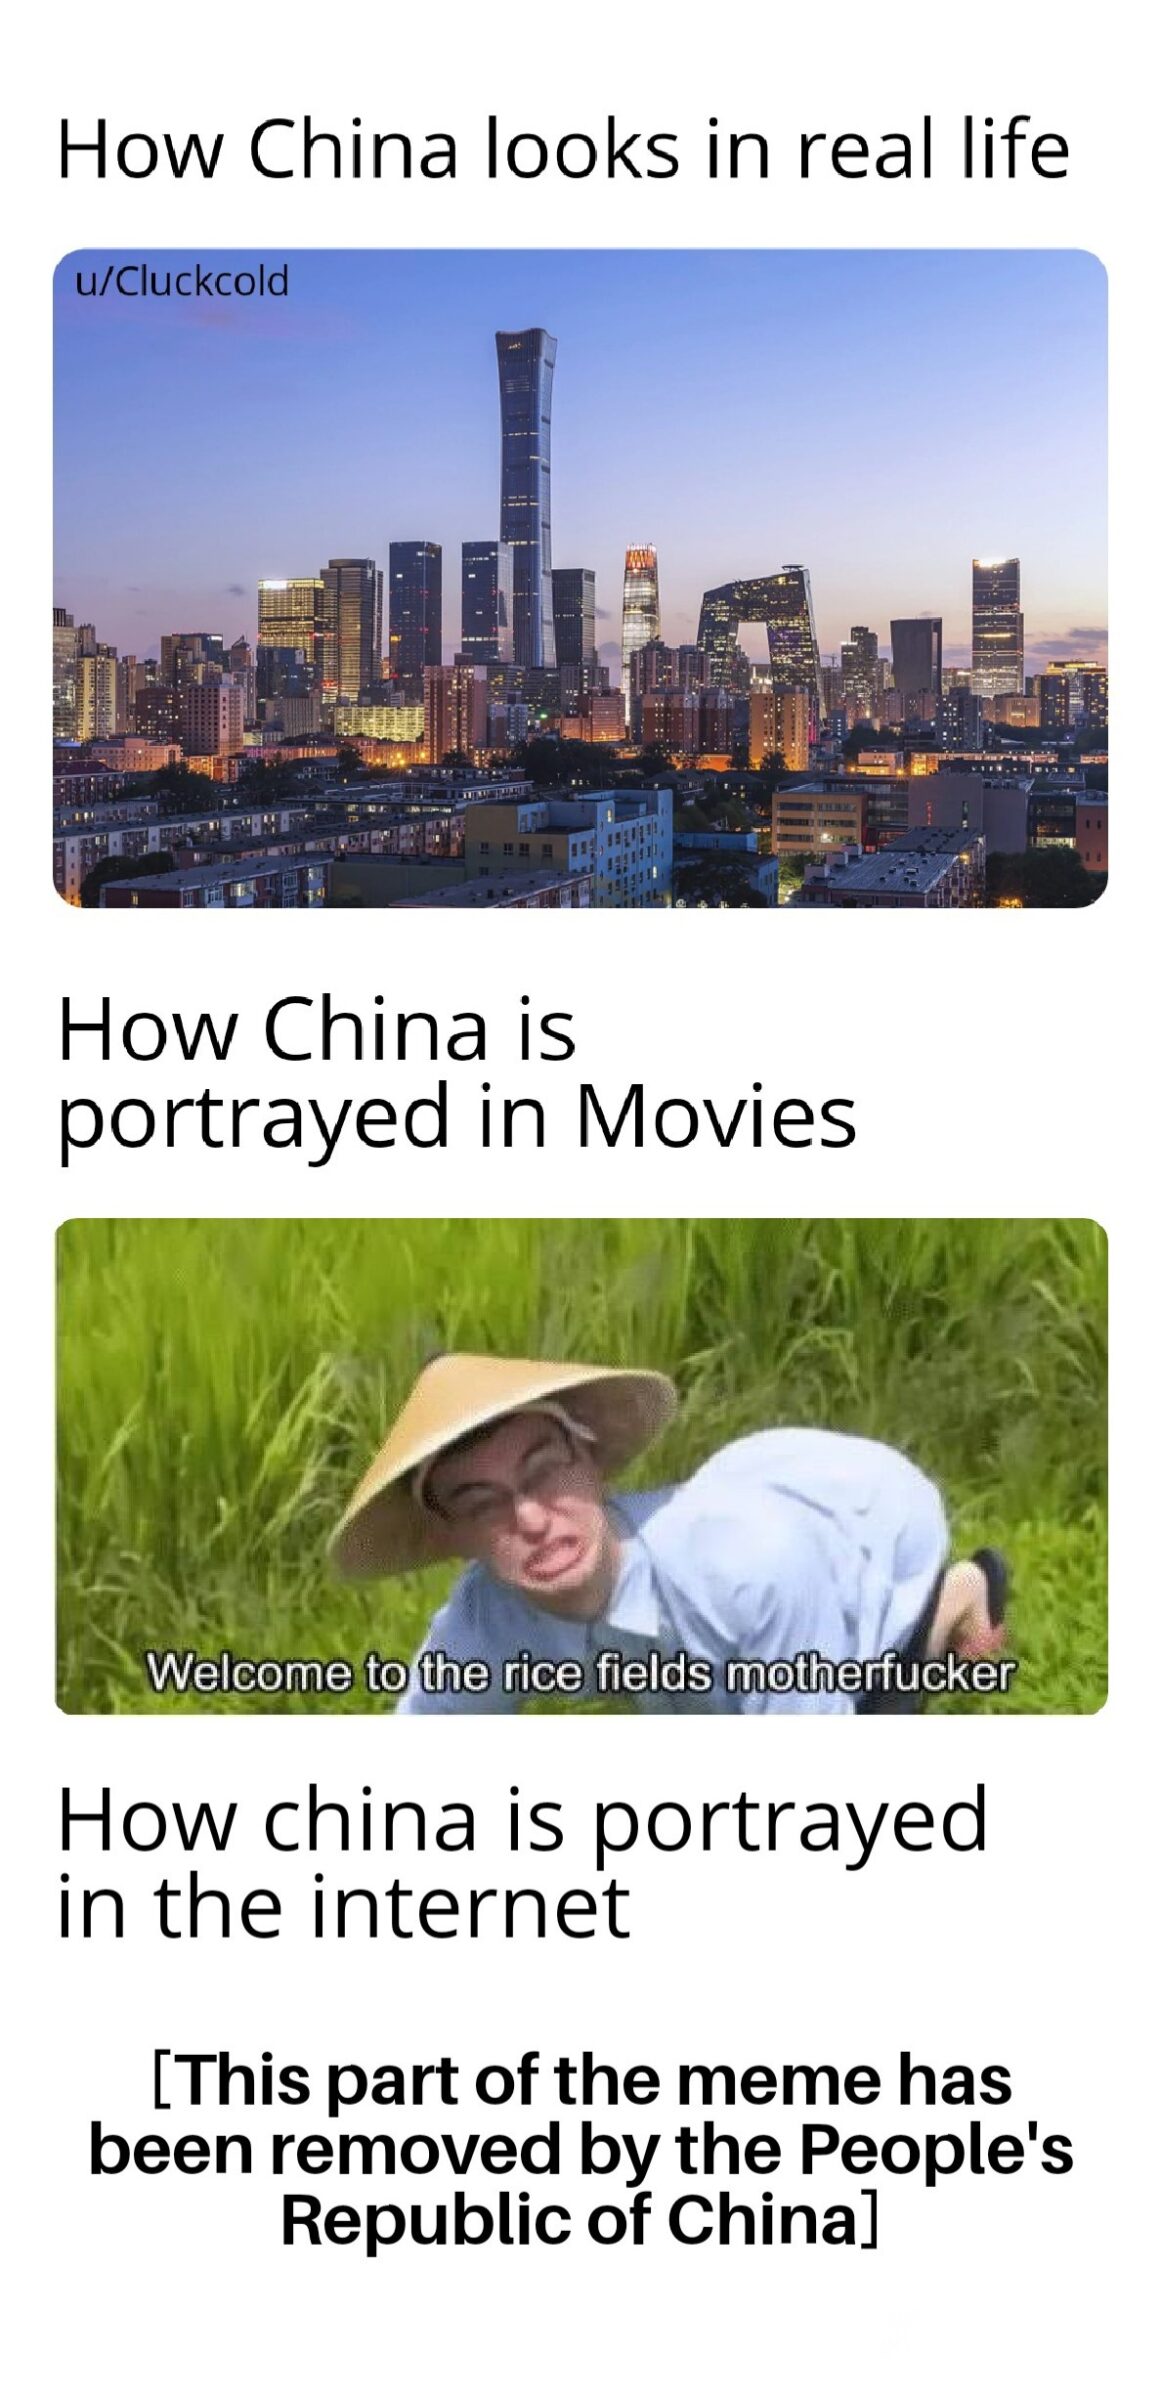 Dank, China, Chinese, REDACTED, Republic, People Dank Memes Dank, China, Chinese, REDACTED, Republic, People text: How China looks in real life u/Cluckcold How China is portrayed in Movies Welcome to the rice How china is portrayed in the internet [This part of the meme has been removed by the People's Republic of China] 